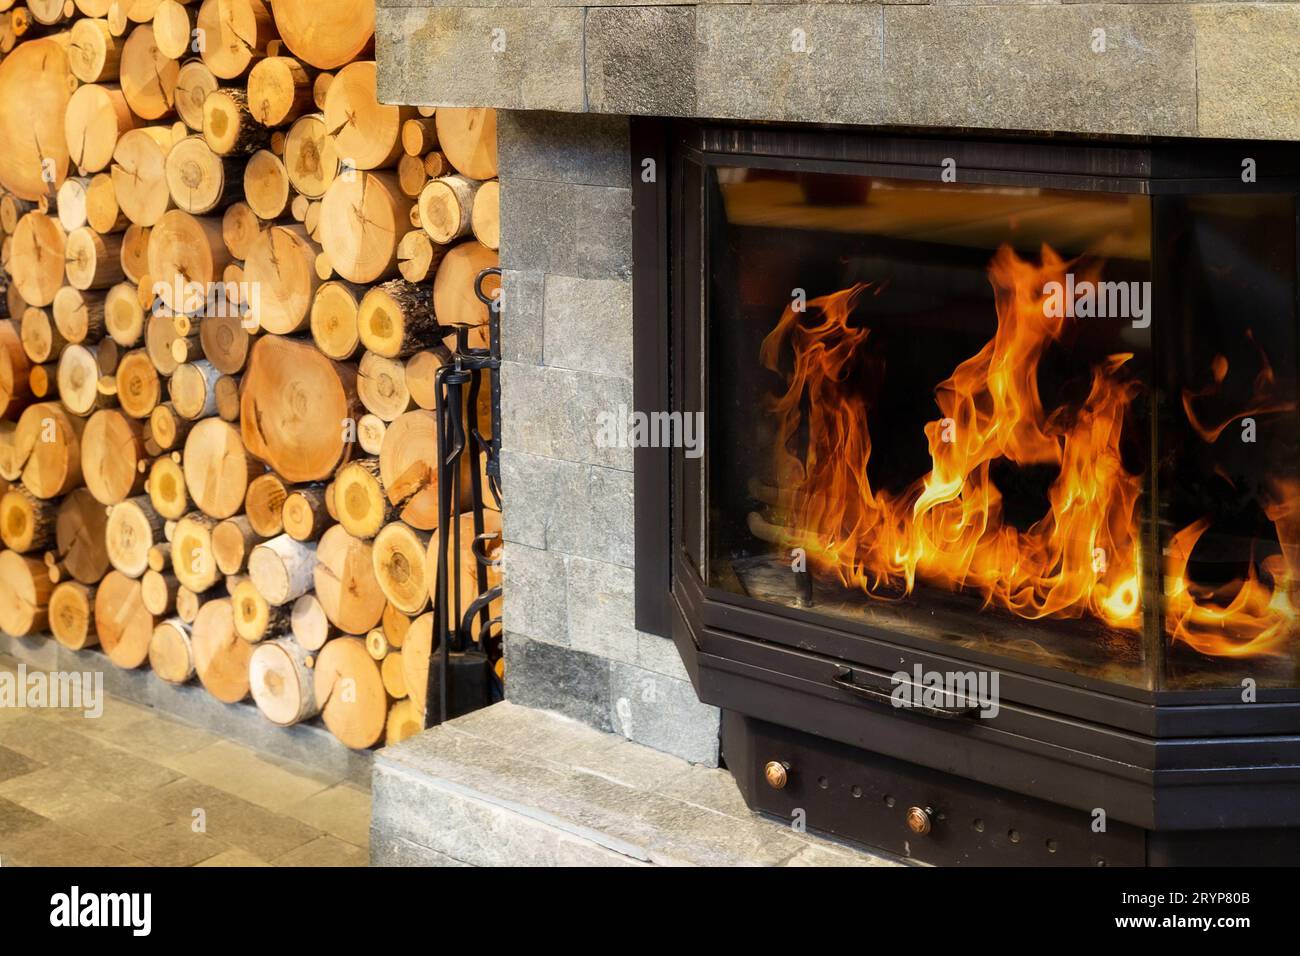 Stone Fireplace with burning fire, Cozy Winter Stock Photo